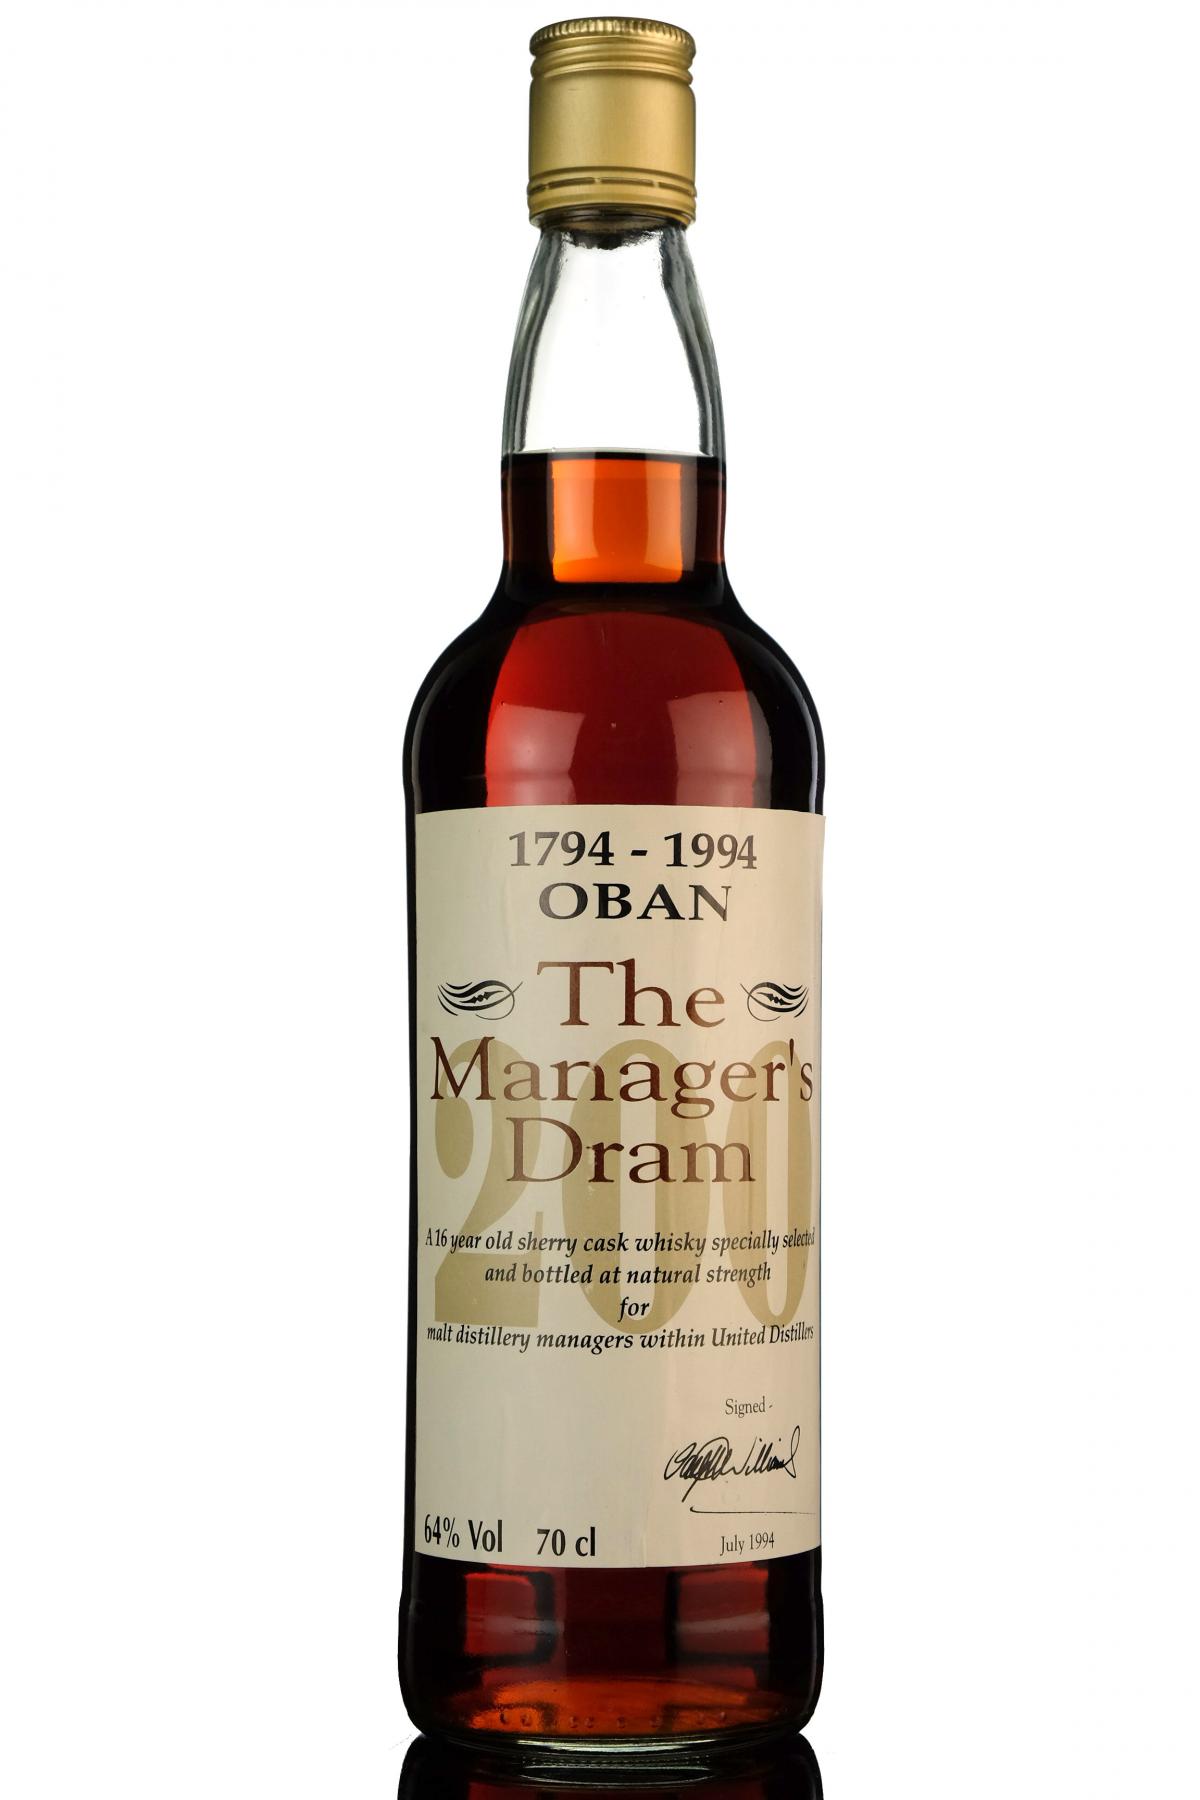 Oban 16 Year Old - Managers Dram - Bicentenary 1994